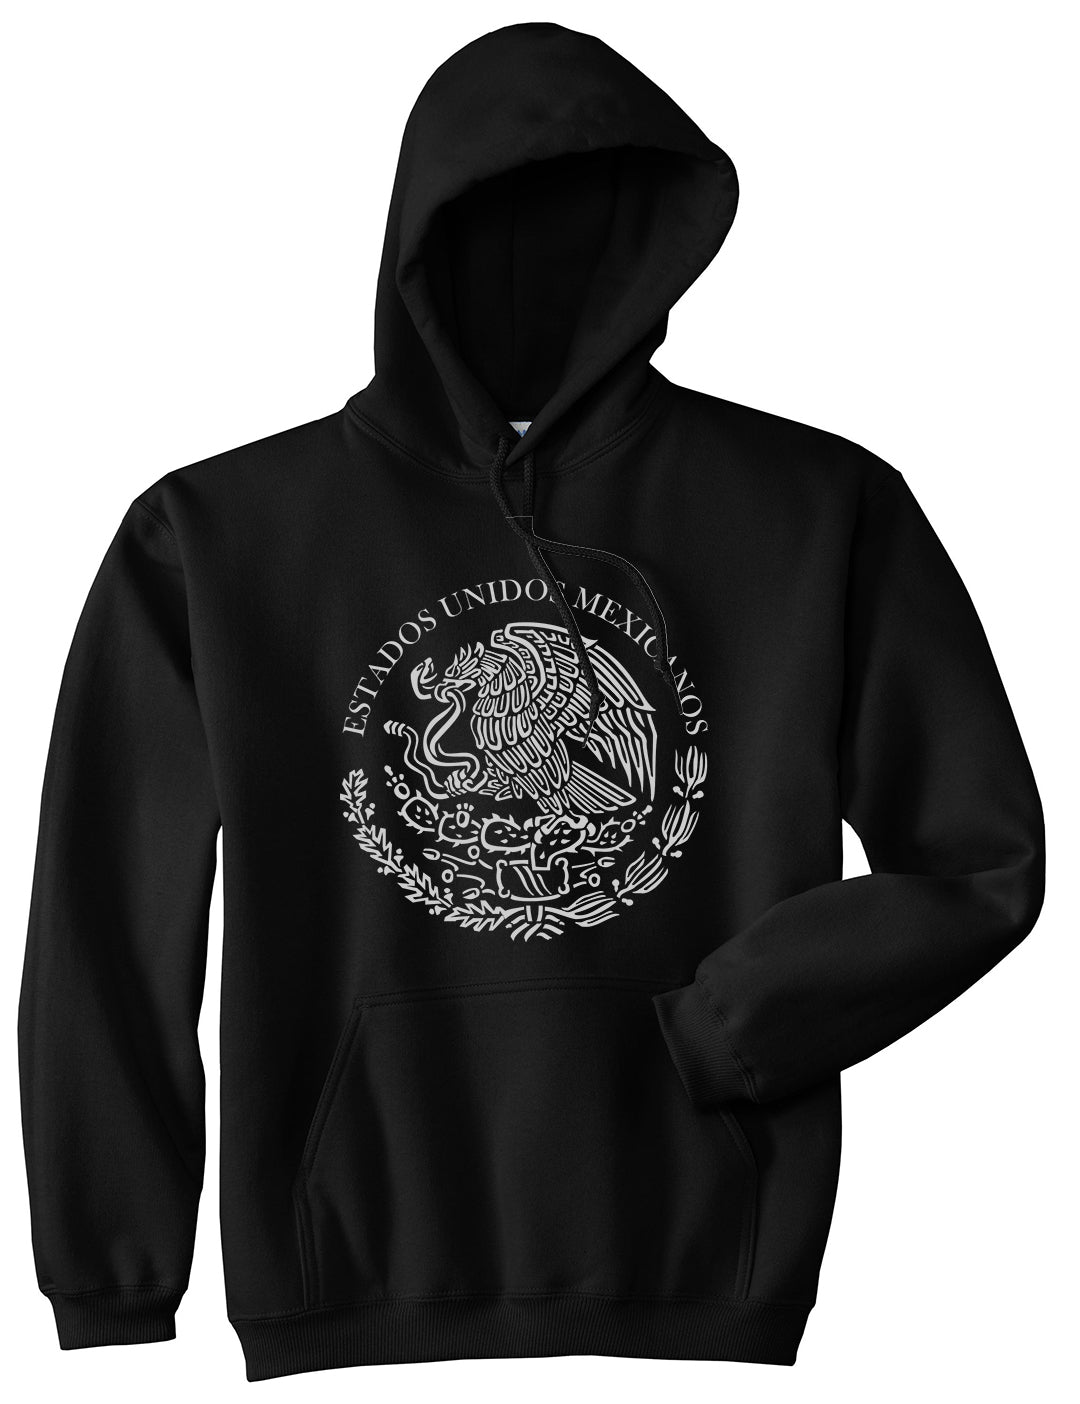 Mexico Coat Of Arms Black White Mens Pullover Hoodie Black